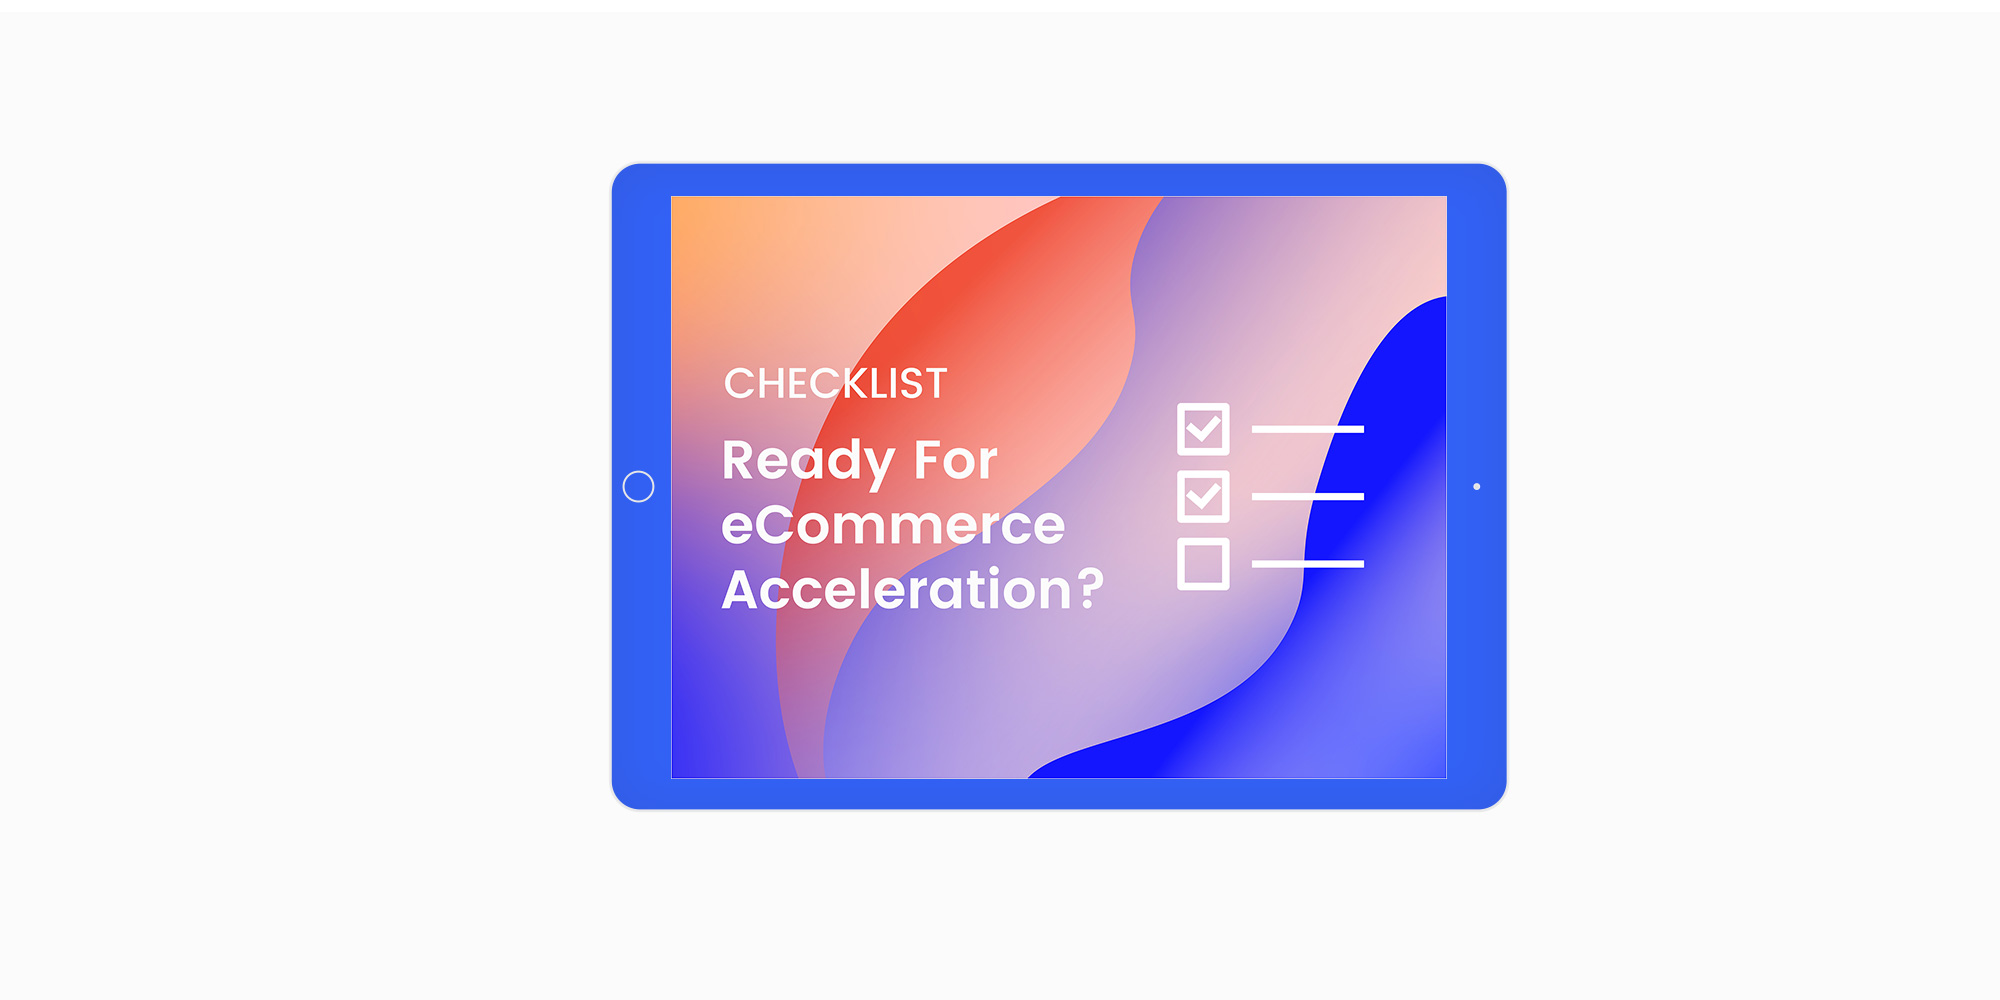 Checklist for eCommerce Acceleration